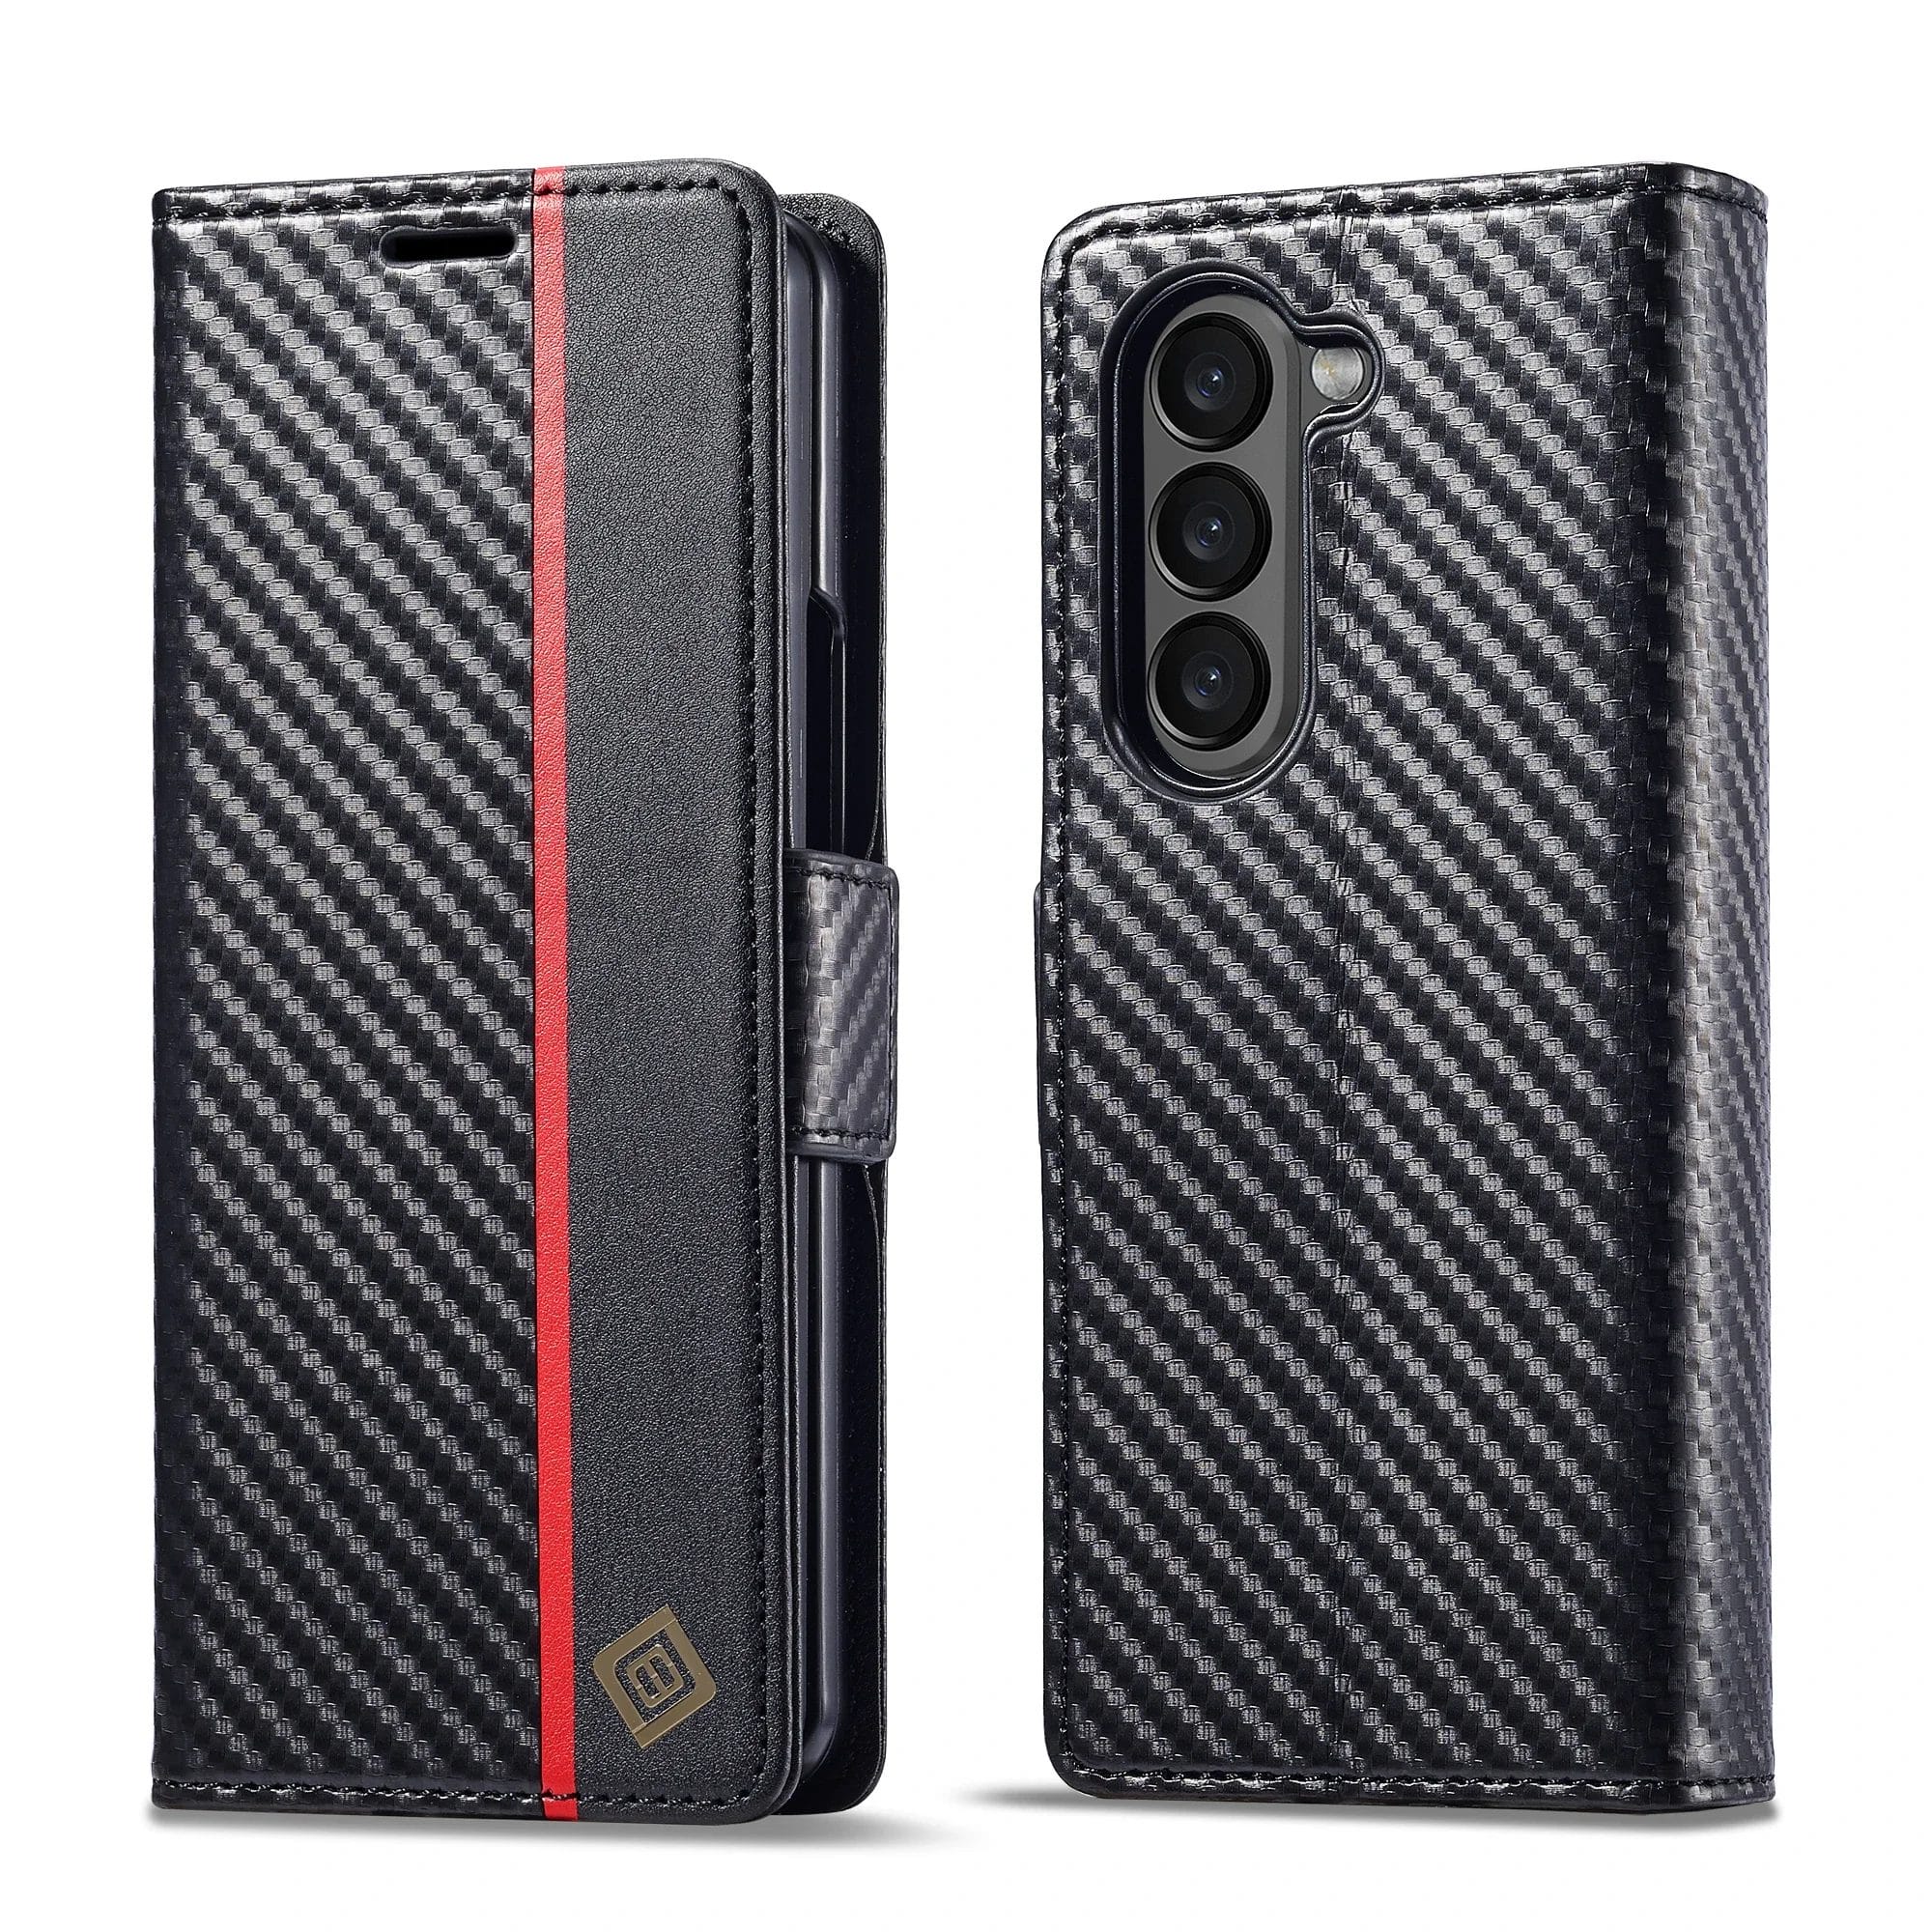 Luxury Carbon Fiber Leather Wallet Case For Samsung Galaxy Z Fold 2